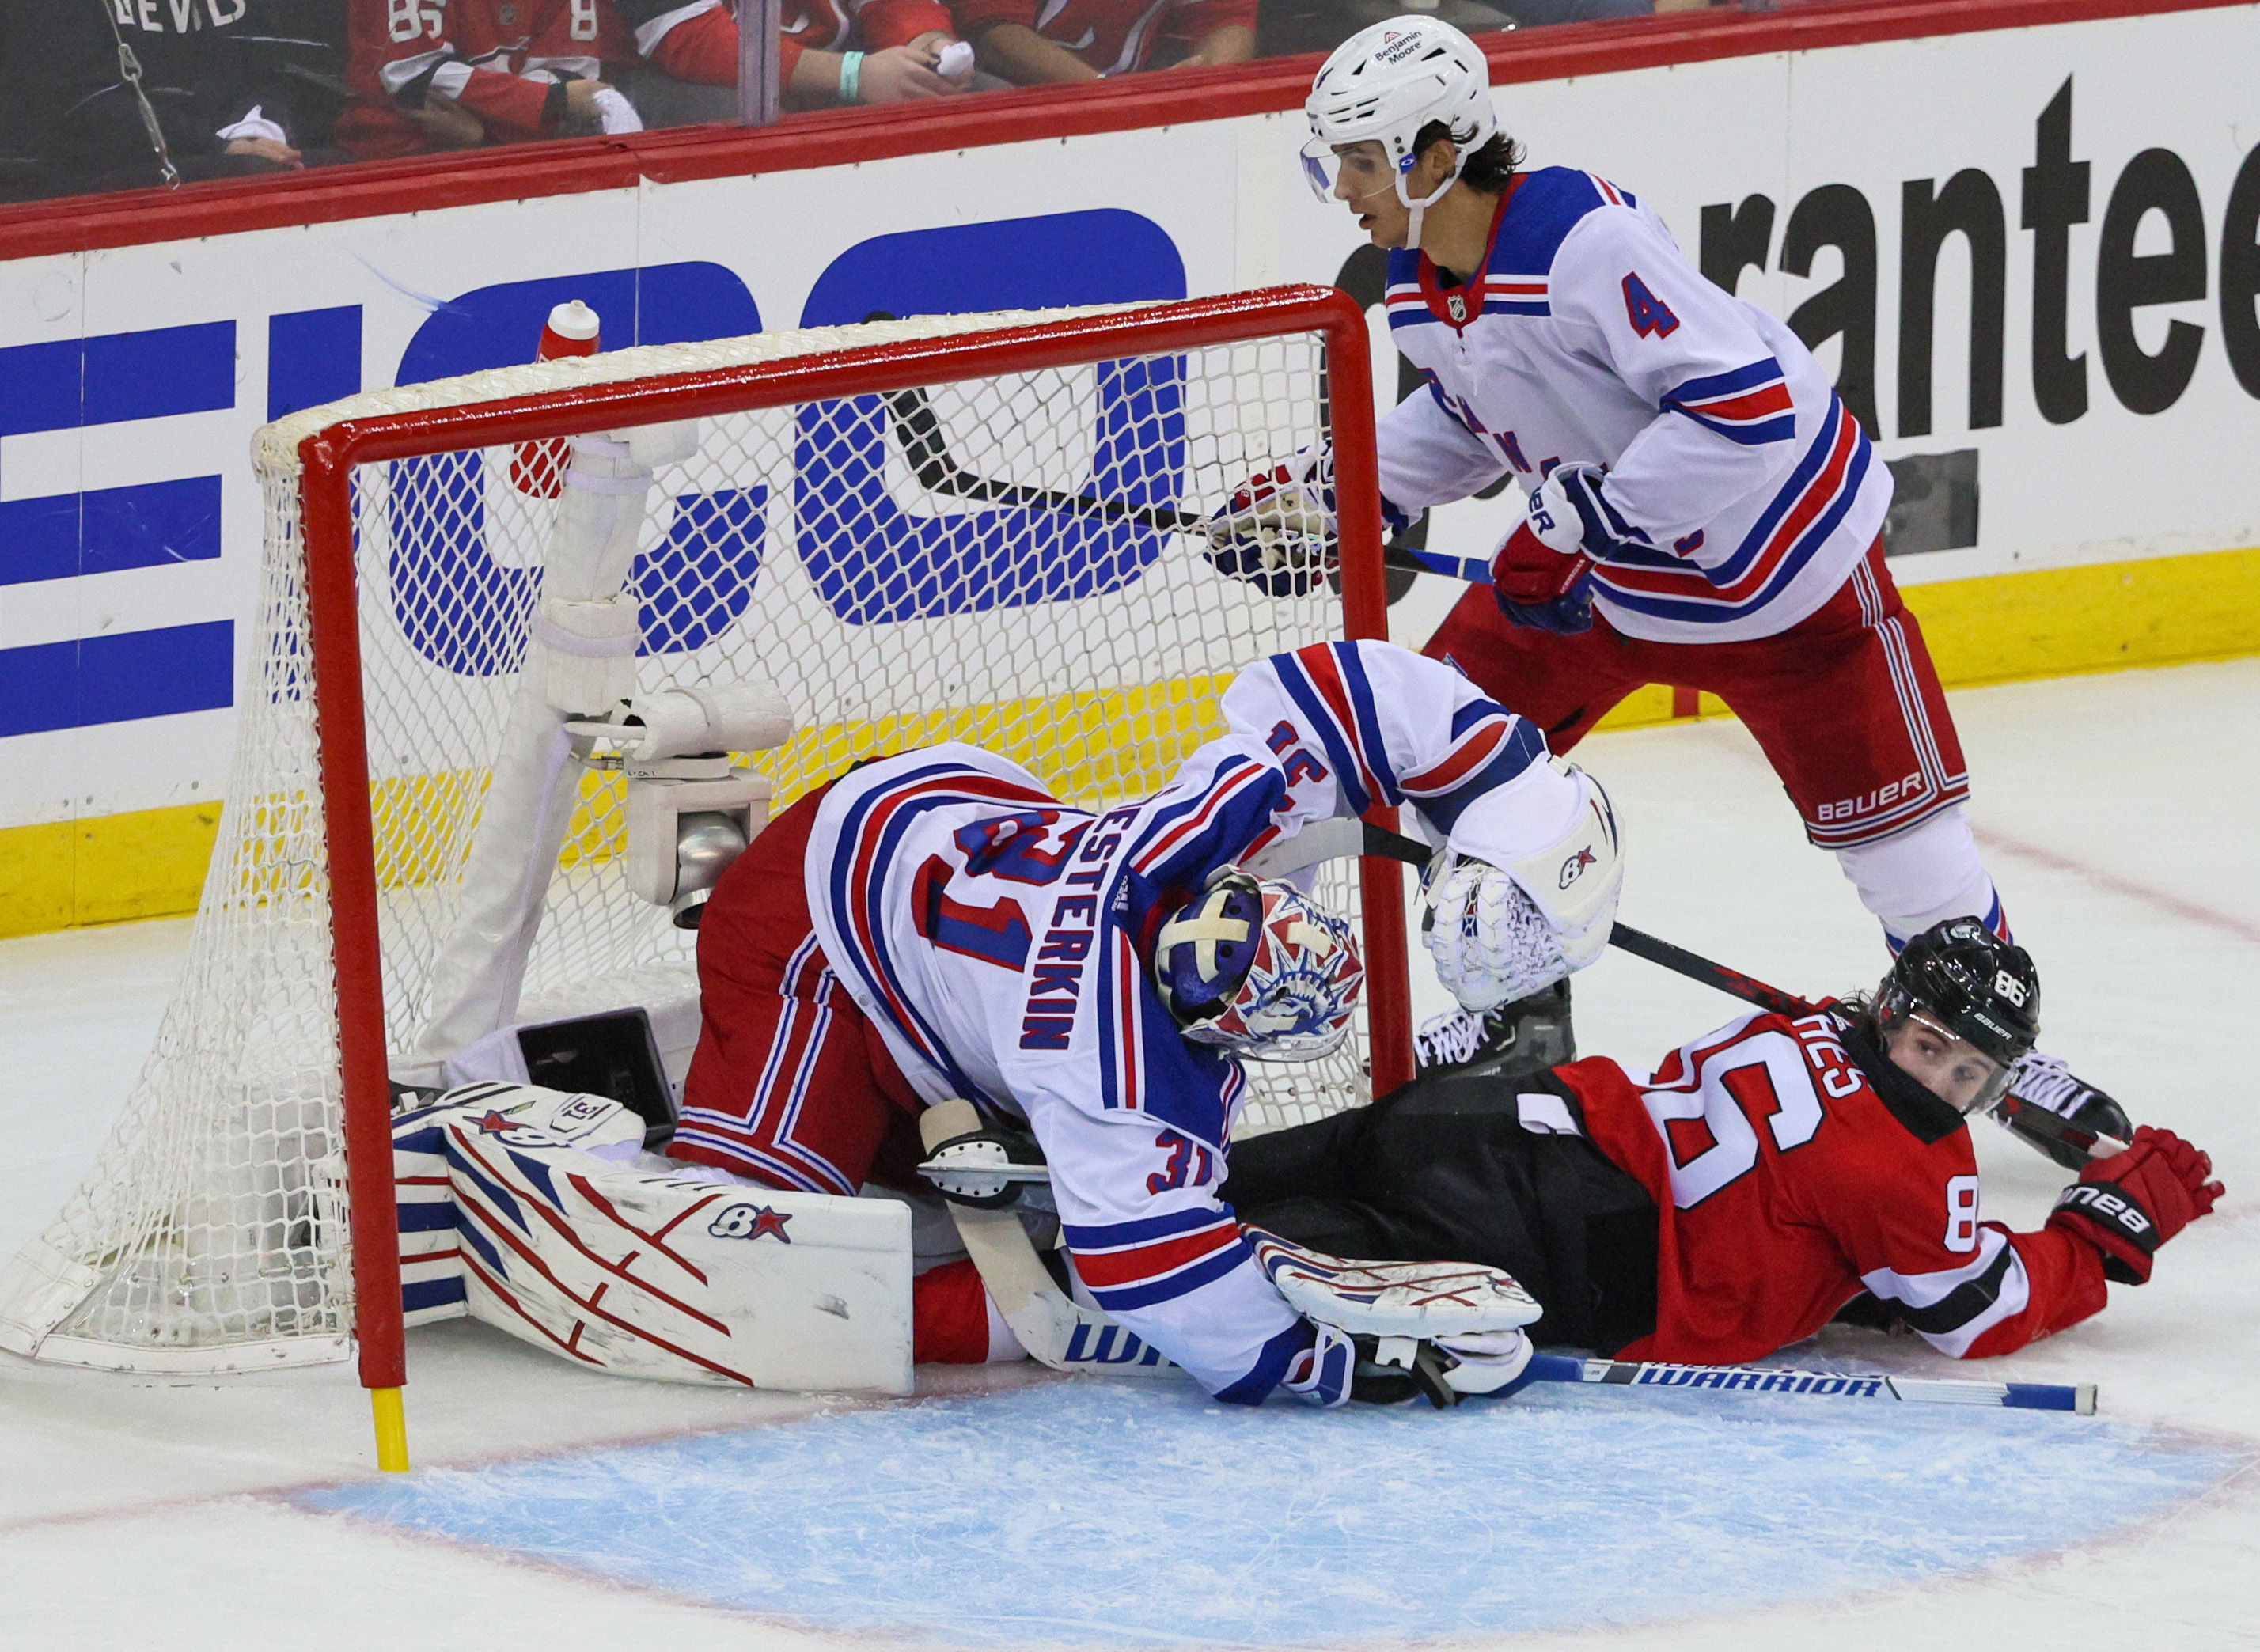 Devils Attempt To Wrap Up Series In Game 6 Versus Rangers